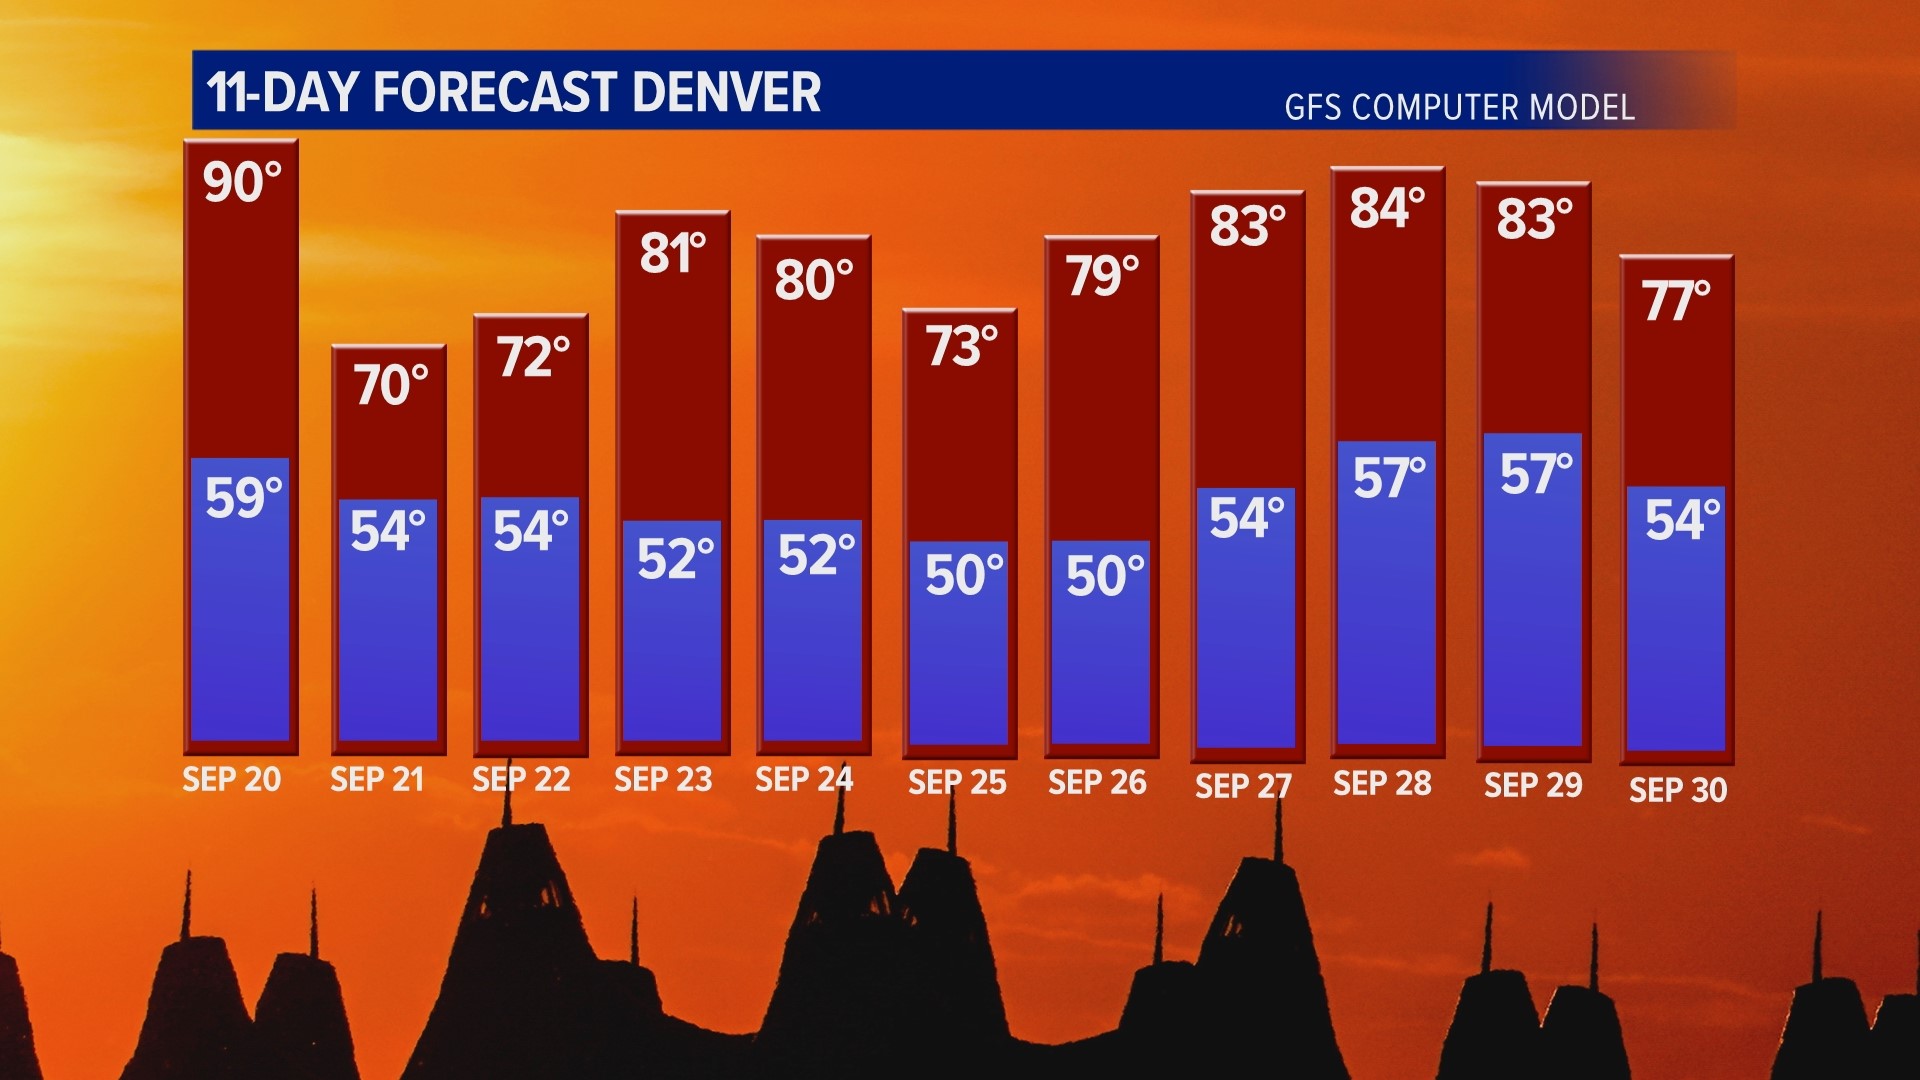 Record tied for most 90degree days in Denver September 2022